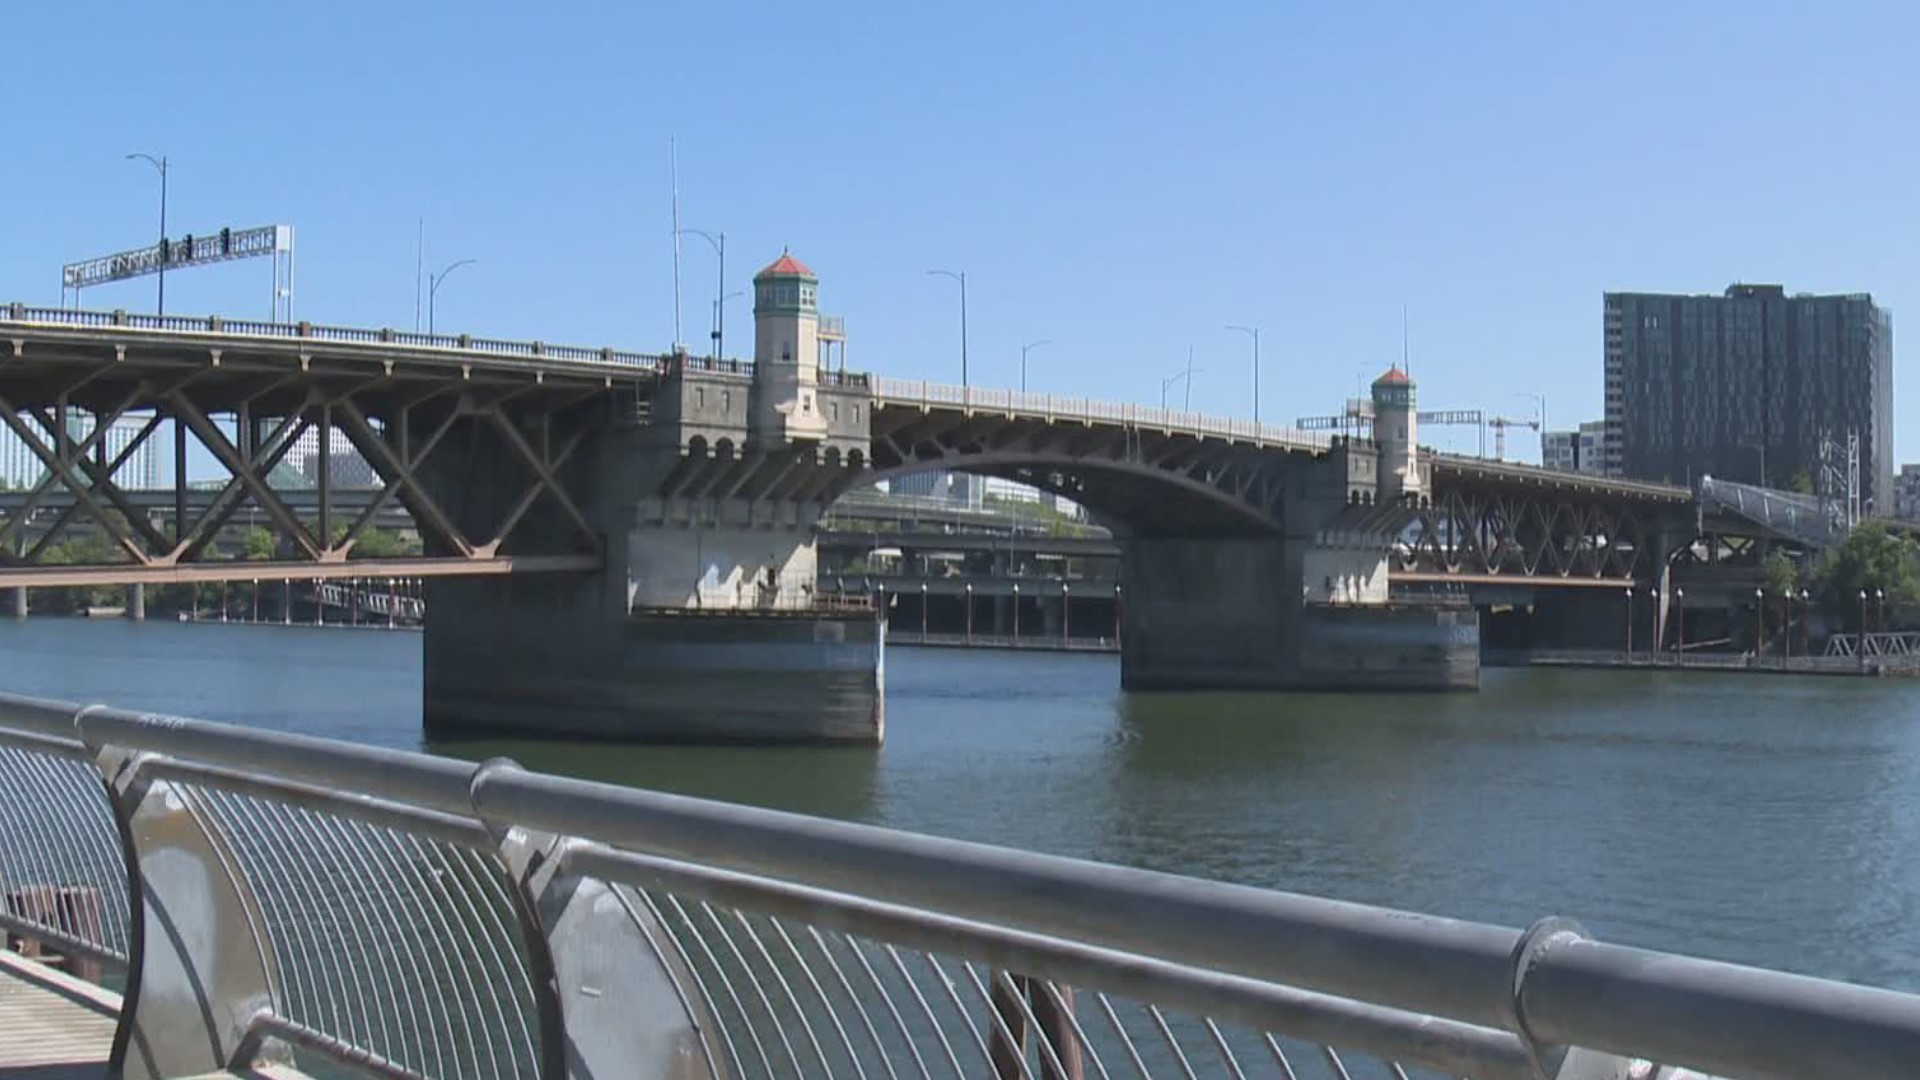 The county will be building a new earthquake-ready Burnside Bridge. Here's a look at what other changes could be on the way.